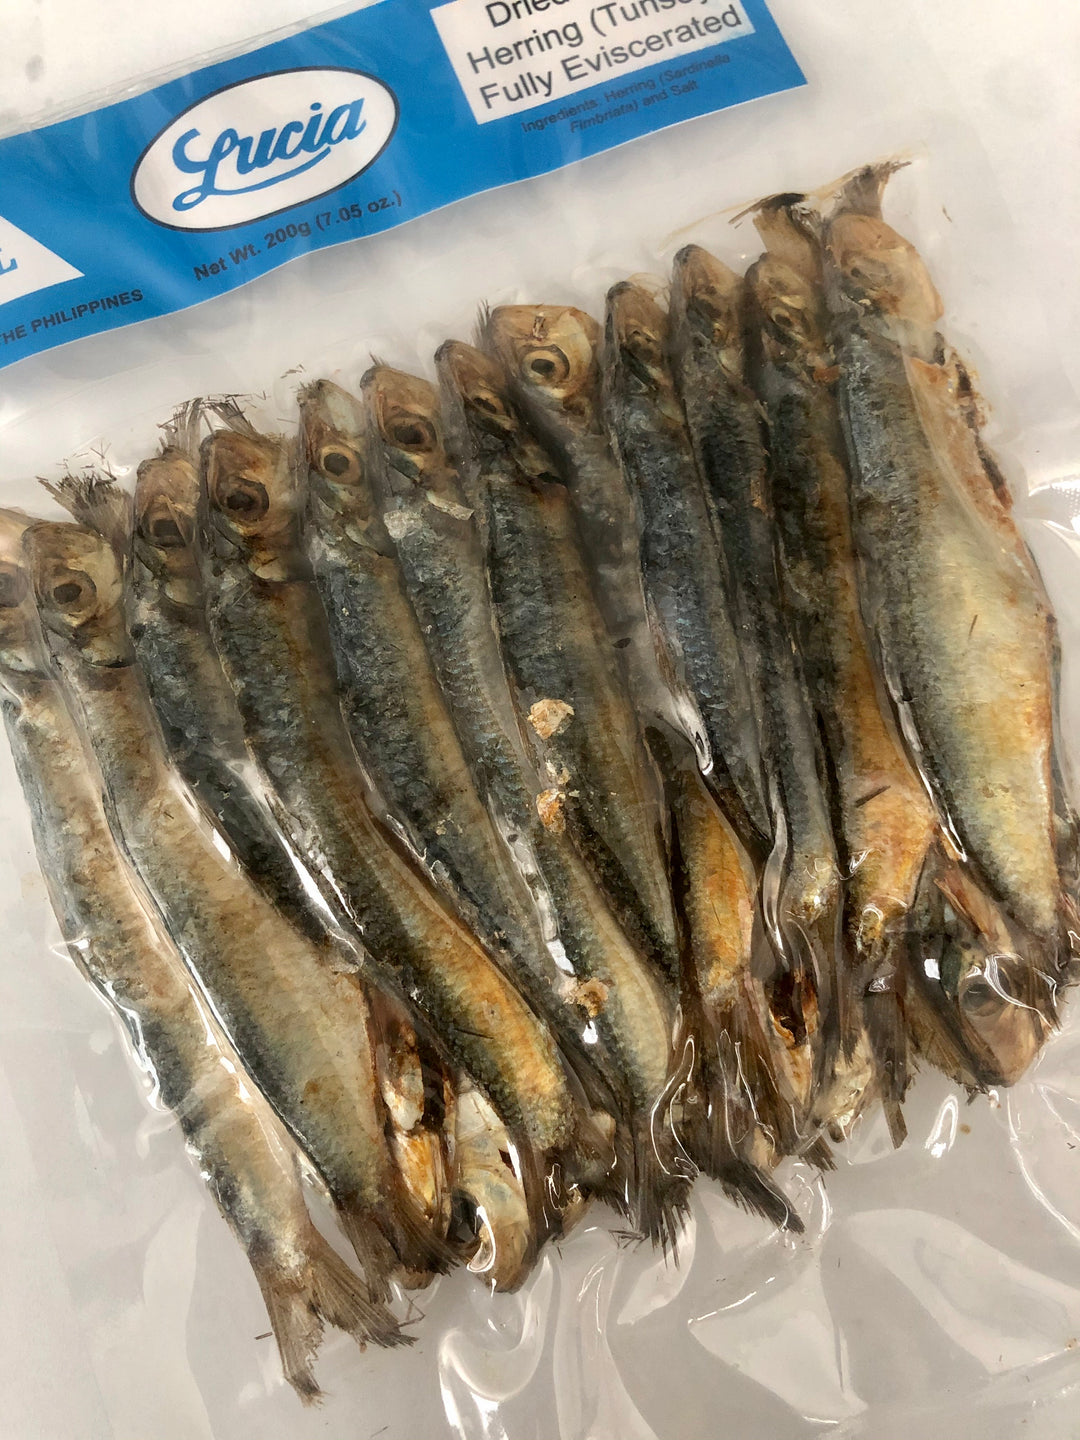 Lucia Dried Salted Herring (TUNSOY) 7.05 OZ